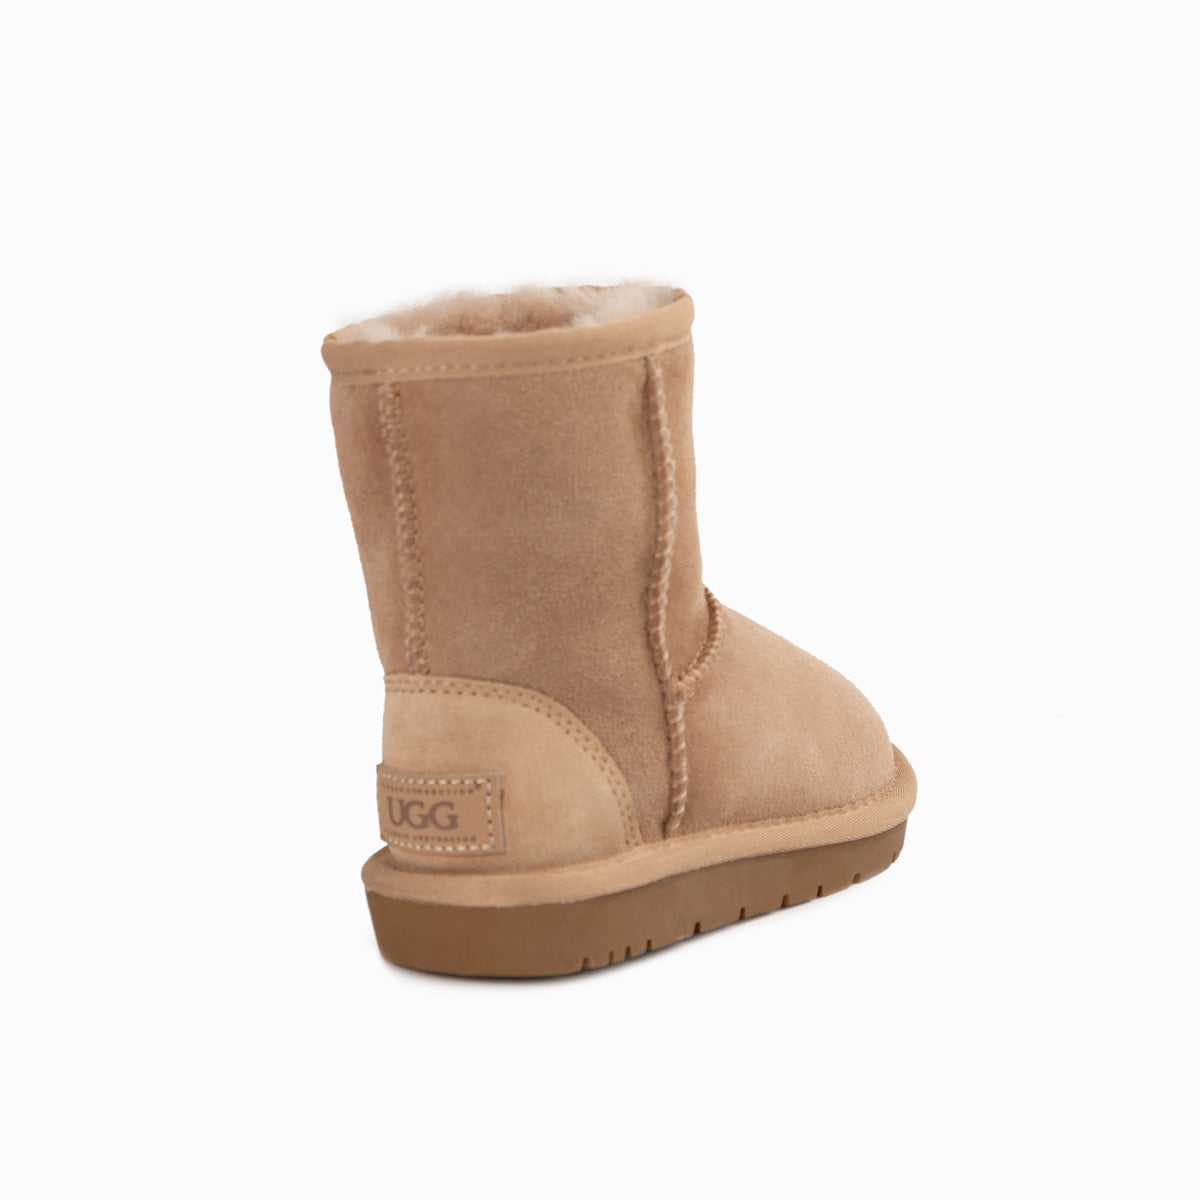 Water-Resistant Kids UGG Boots